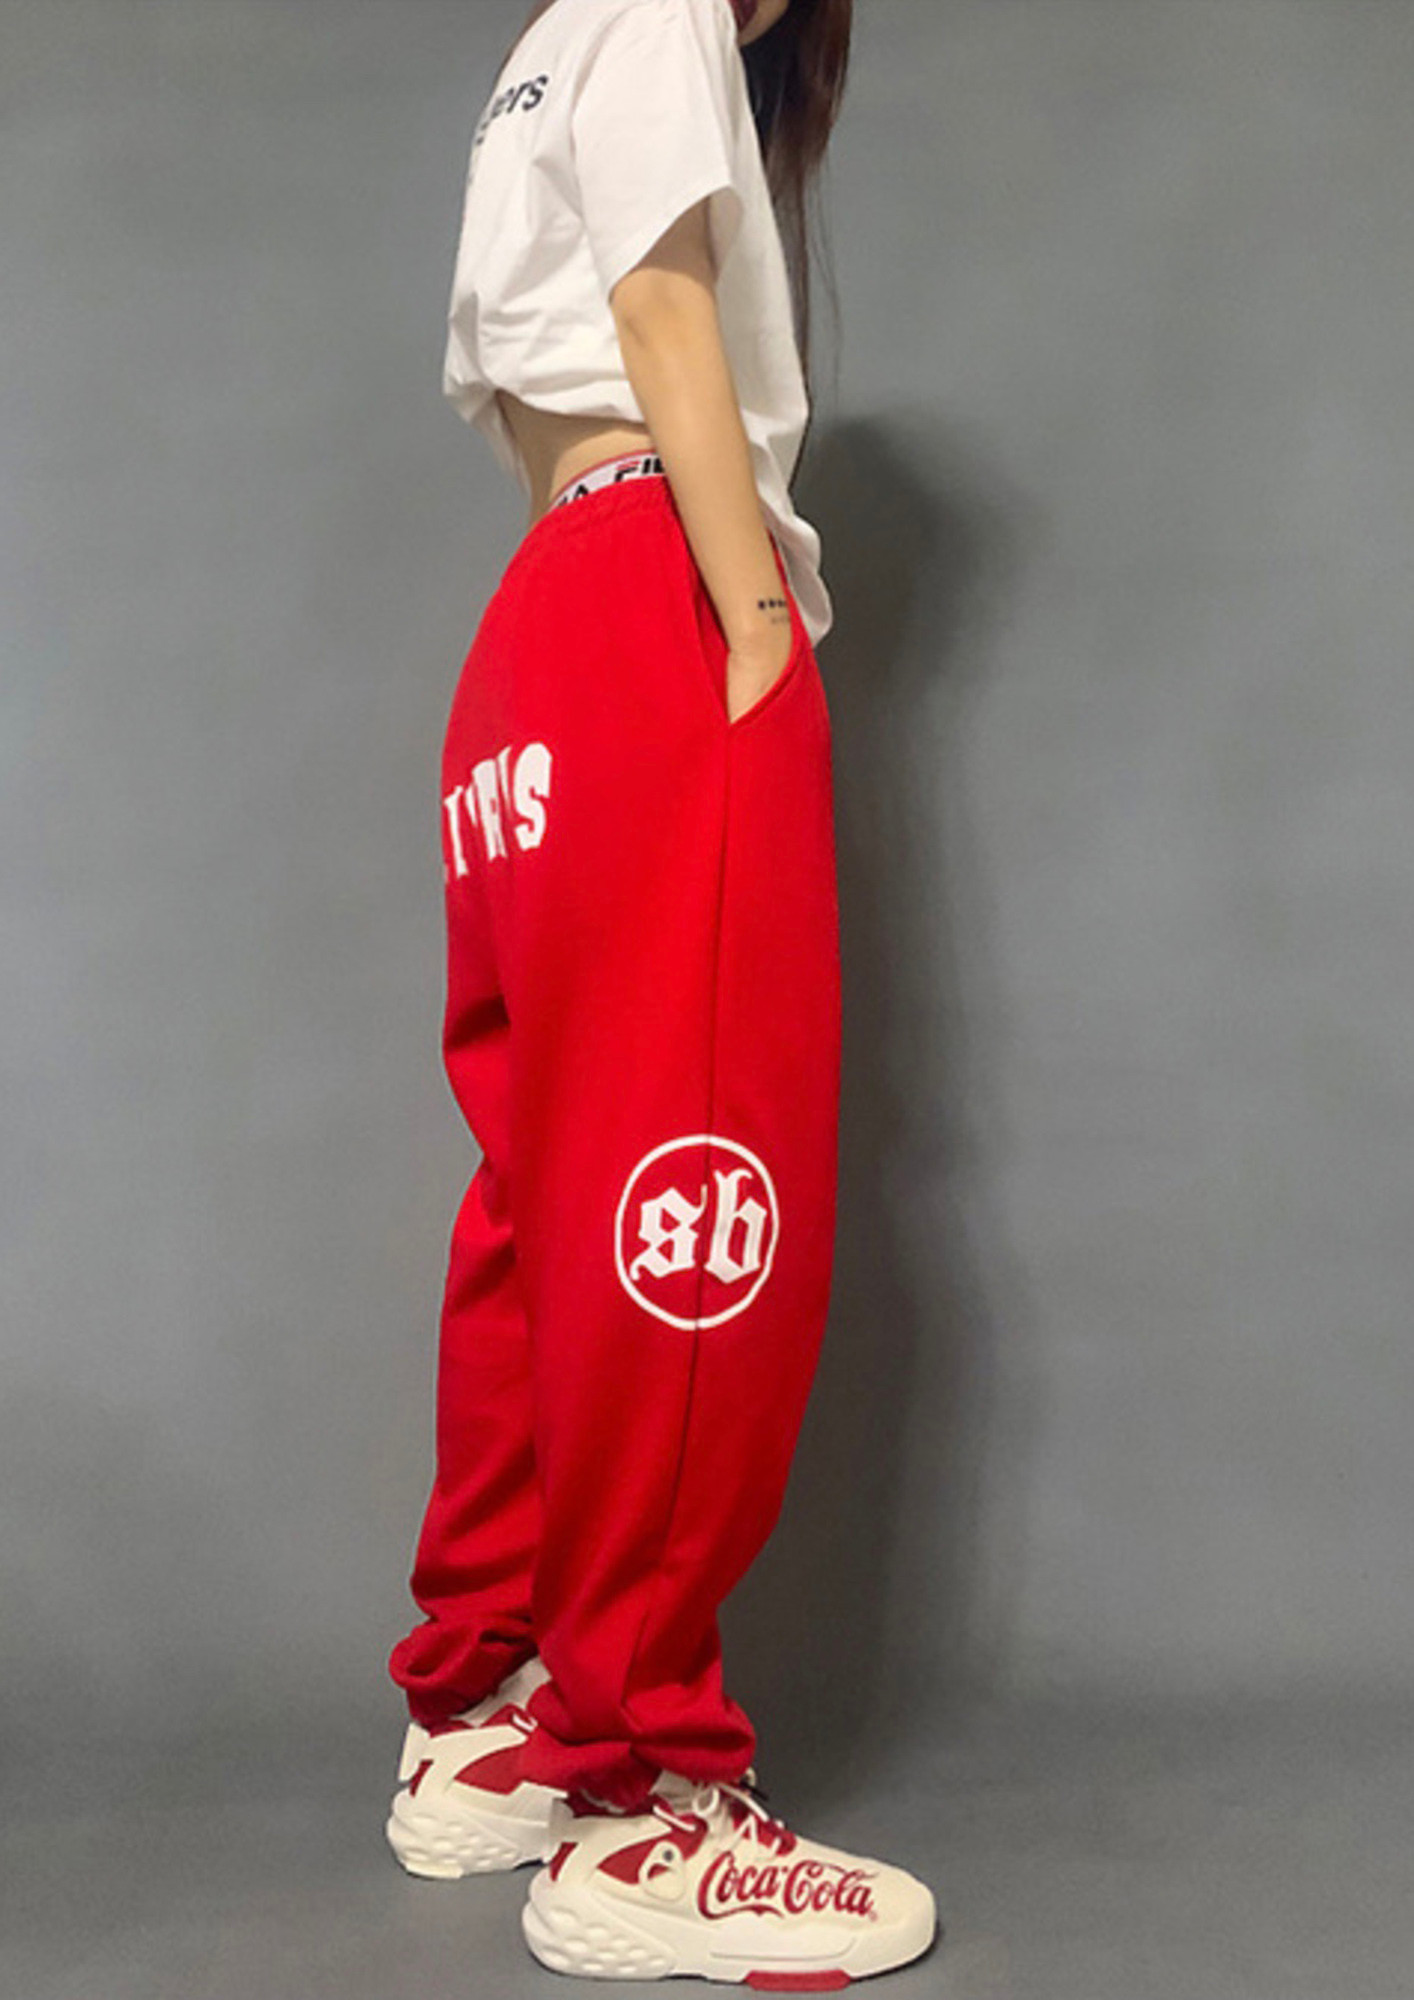 Buy Latest Joggers for Women Online in India  Westside